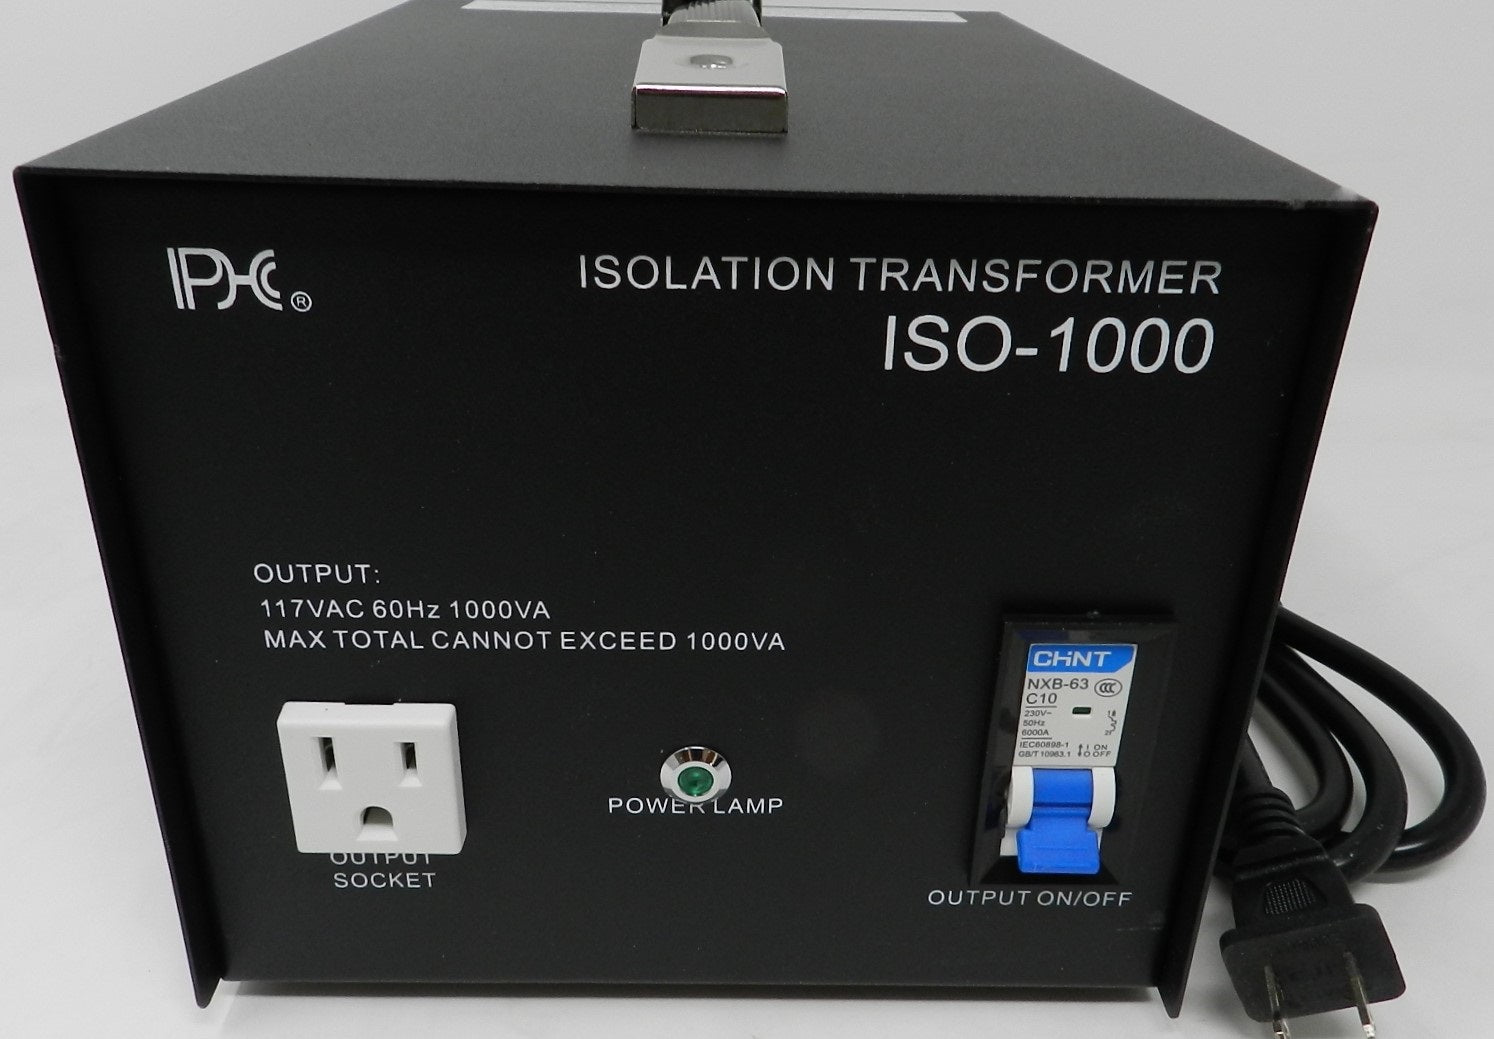 When you may need an isolation transformer